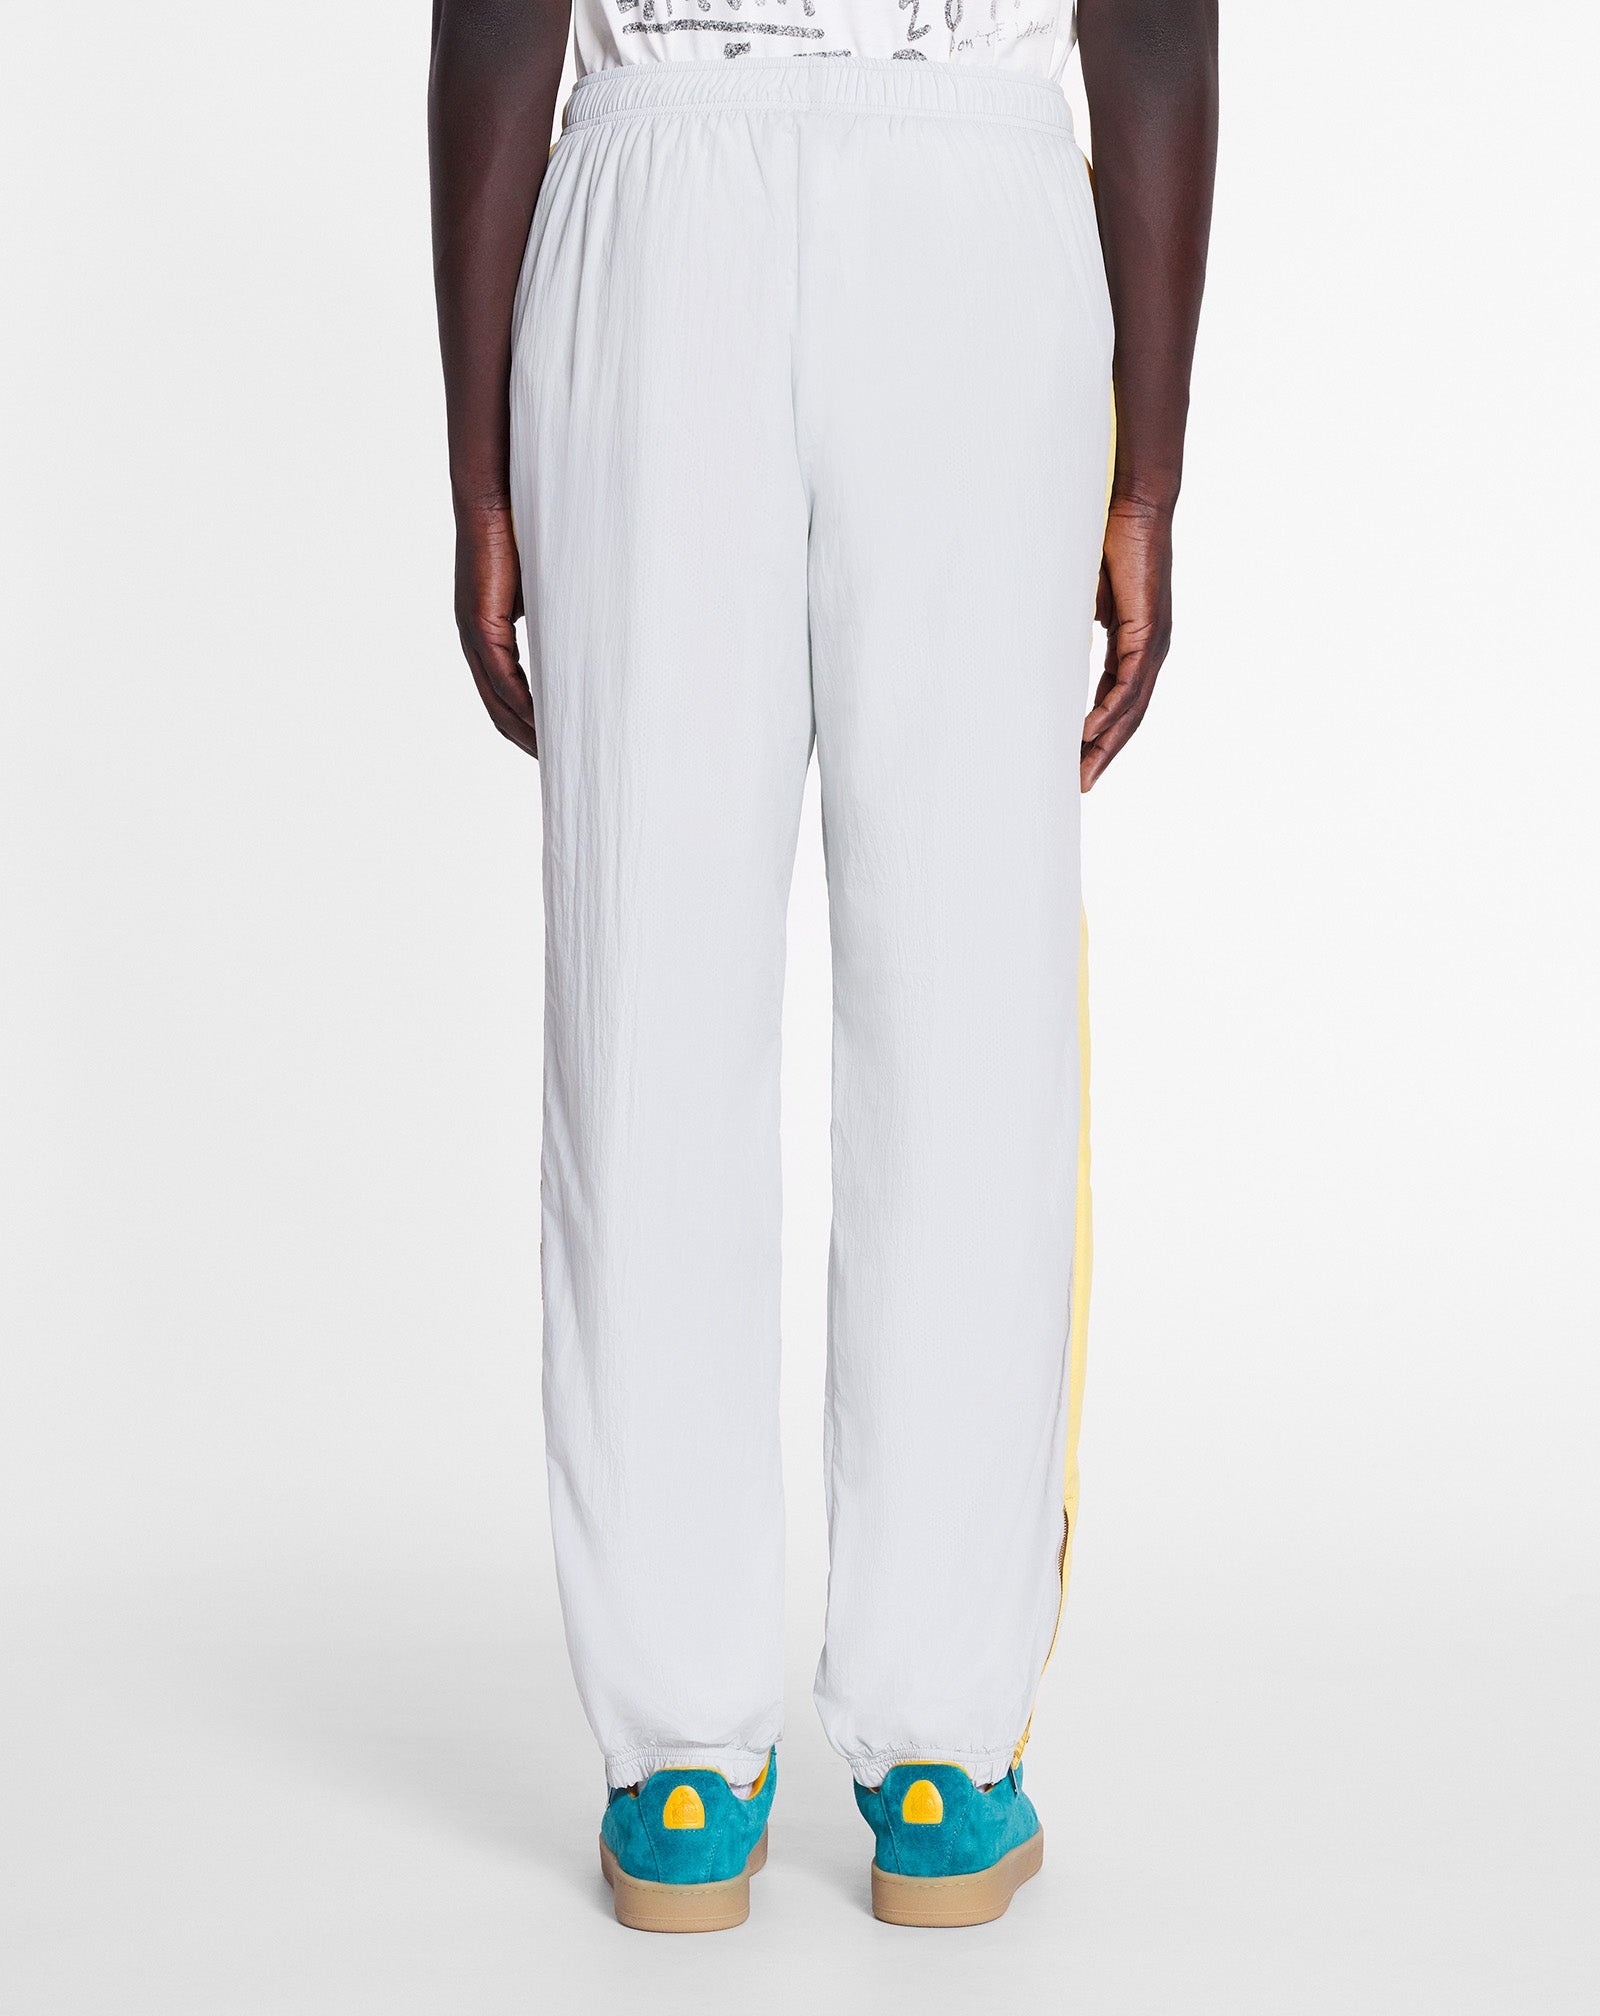 LANVIN X FUTURE JOGGING PANTS WITH CONTRASTING STRIPES - 7